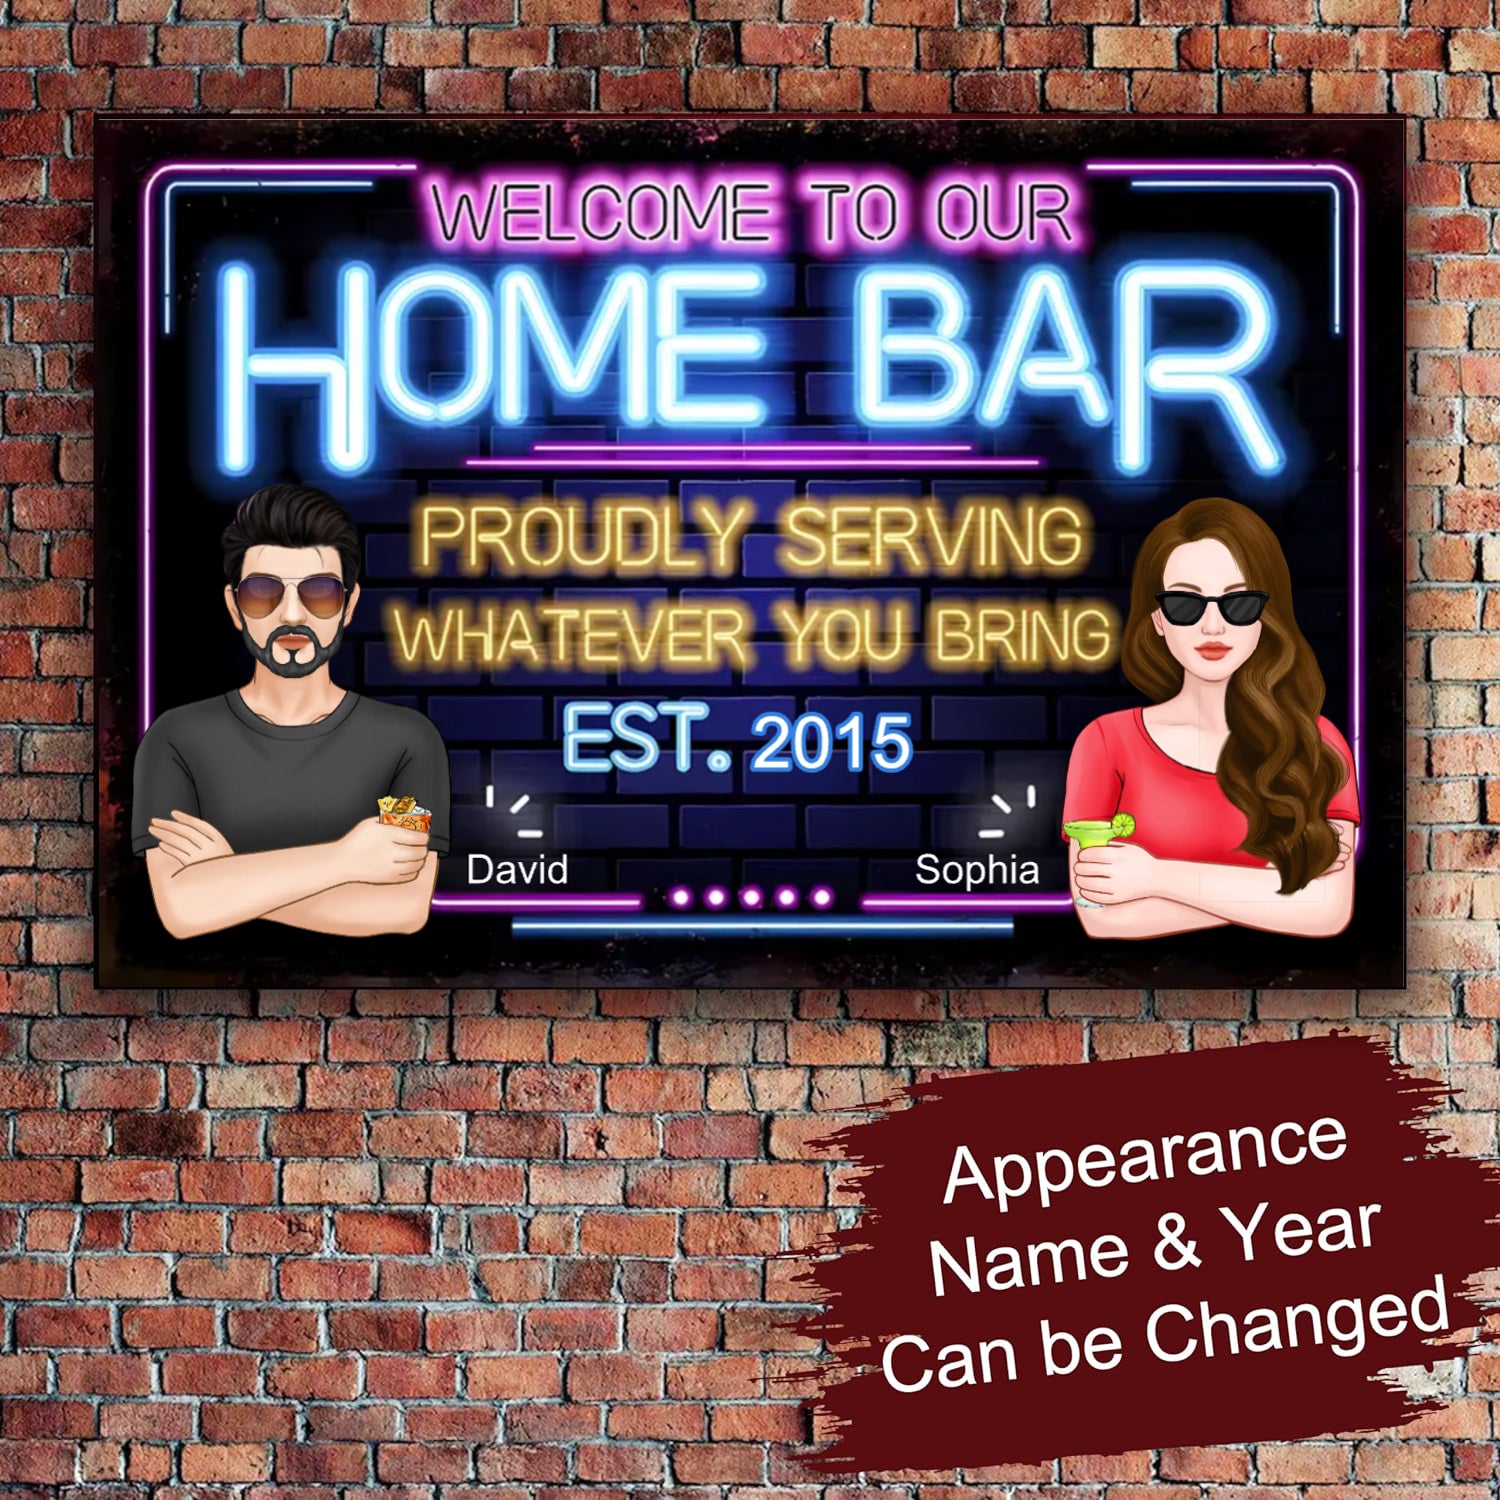 Home Bar III - Come Early & Stay Late: Bring All You Drink & Drink All You Bring - Couple Husband Wife Personalized Classic Metal Sign, White